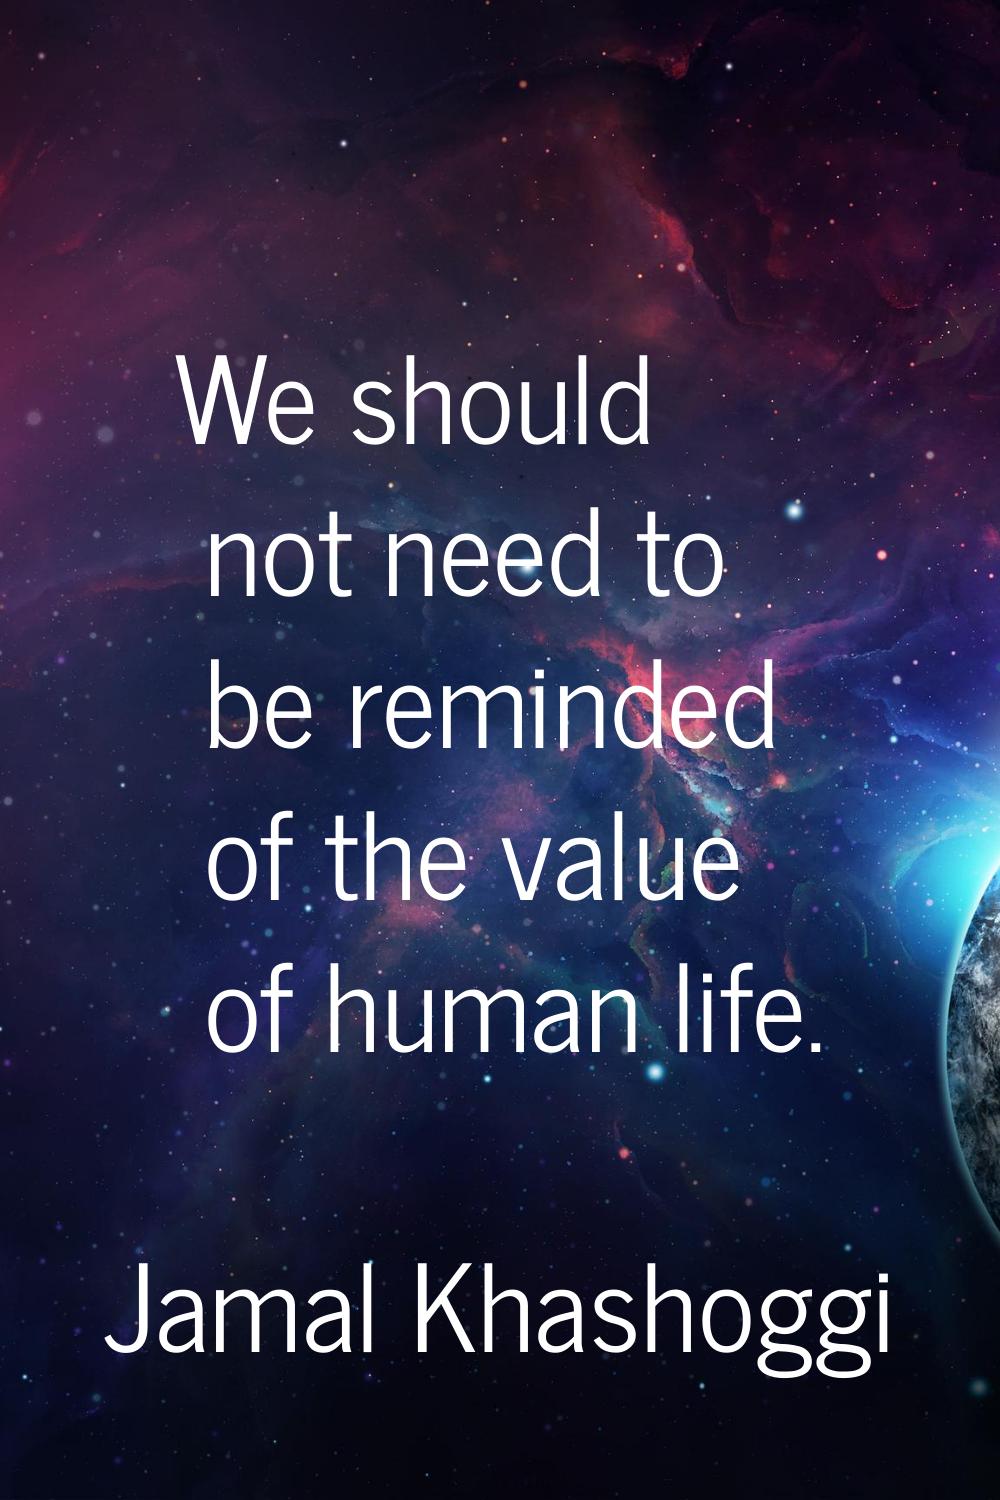 We should not need to be reminded of the value of human life.